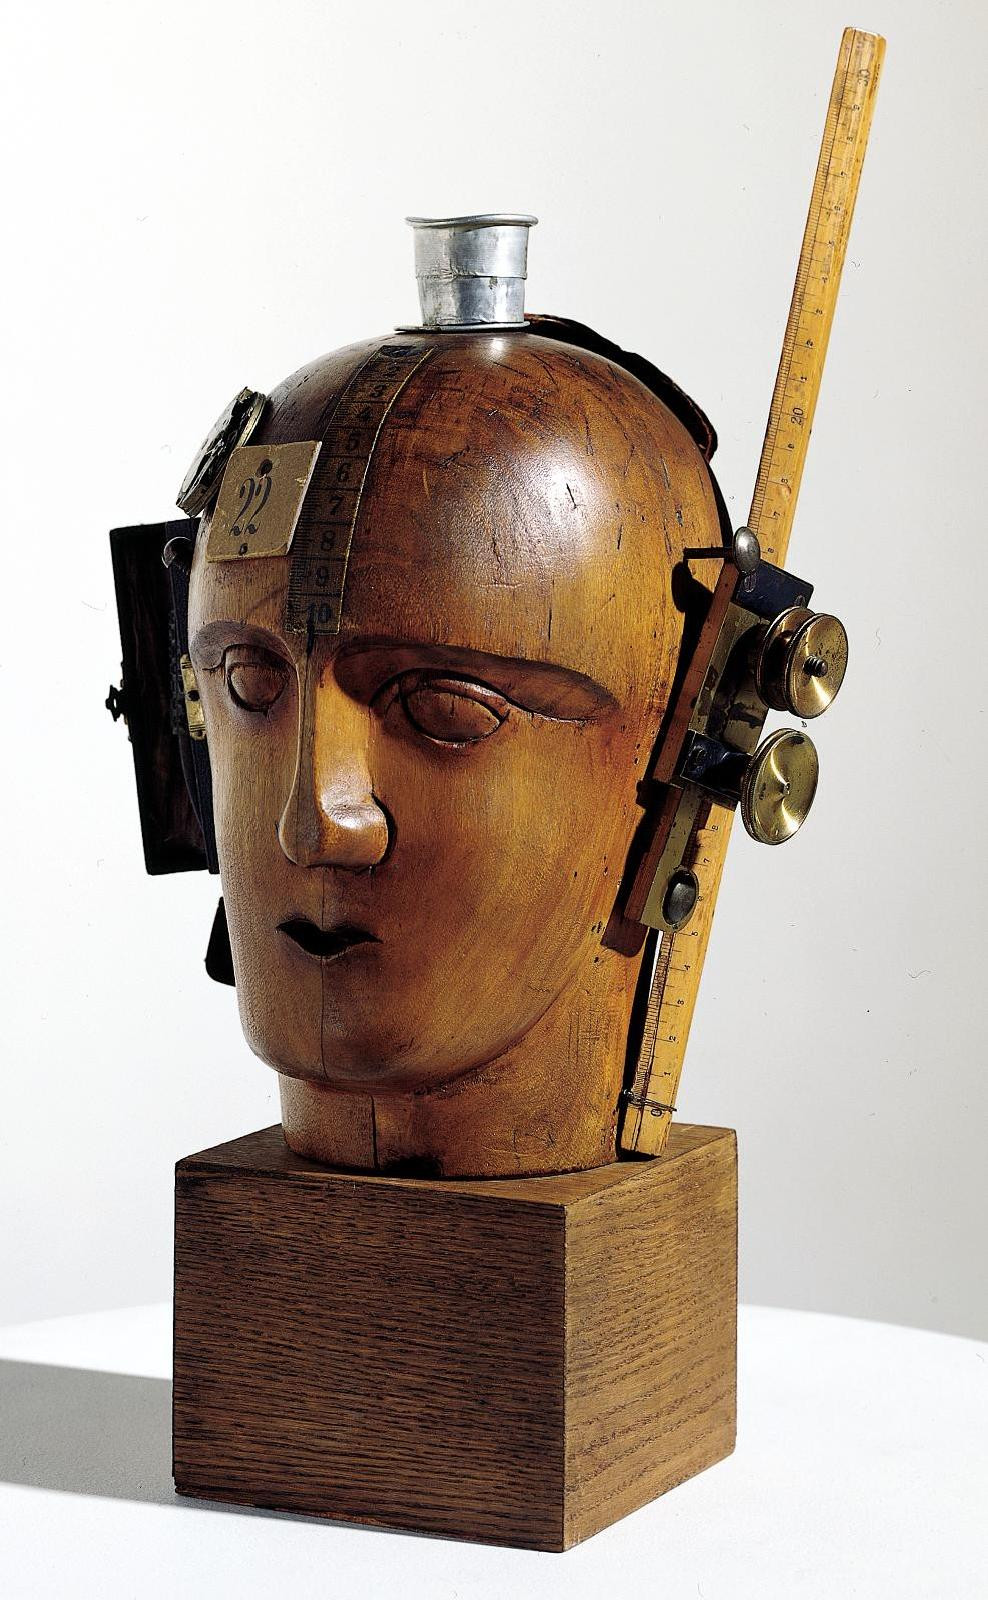 Raoul Hausmann, Mechanical Head (The Spirit of Our Time), assemblage, c. 1920